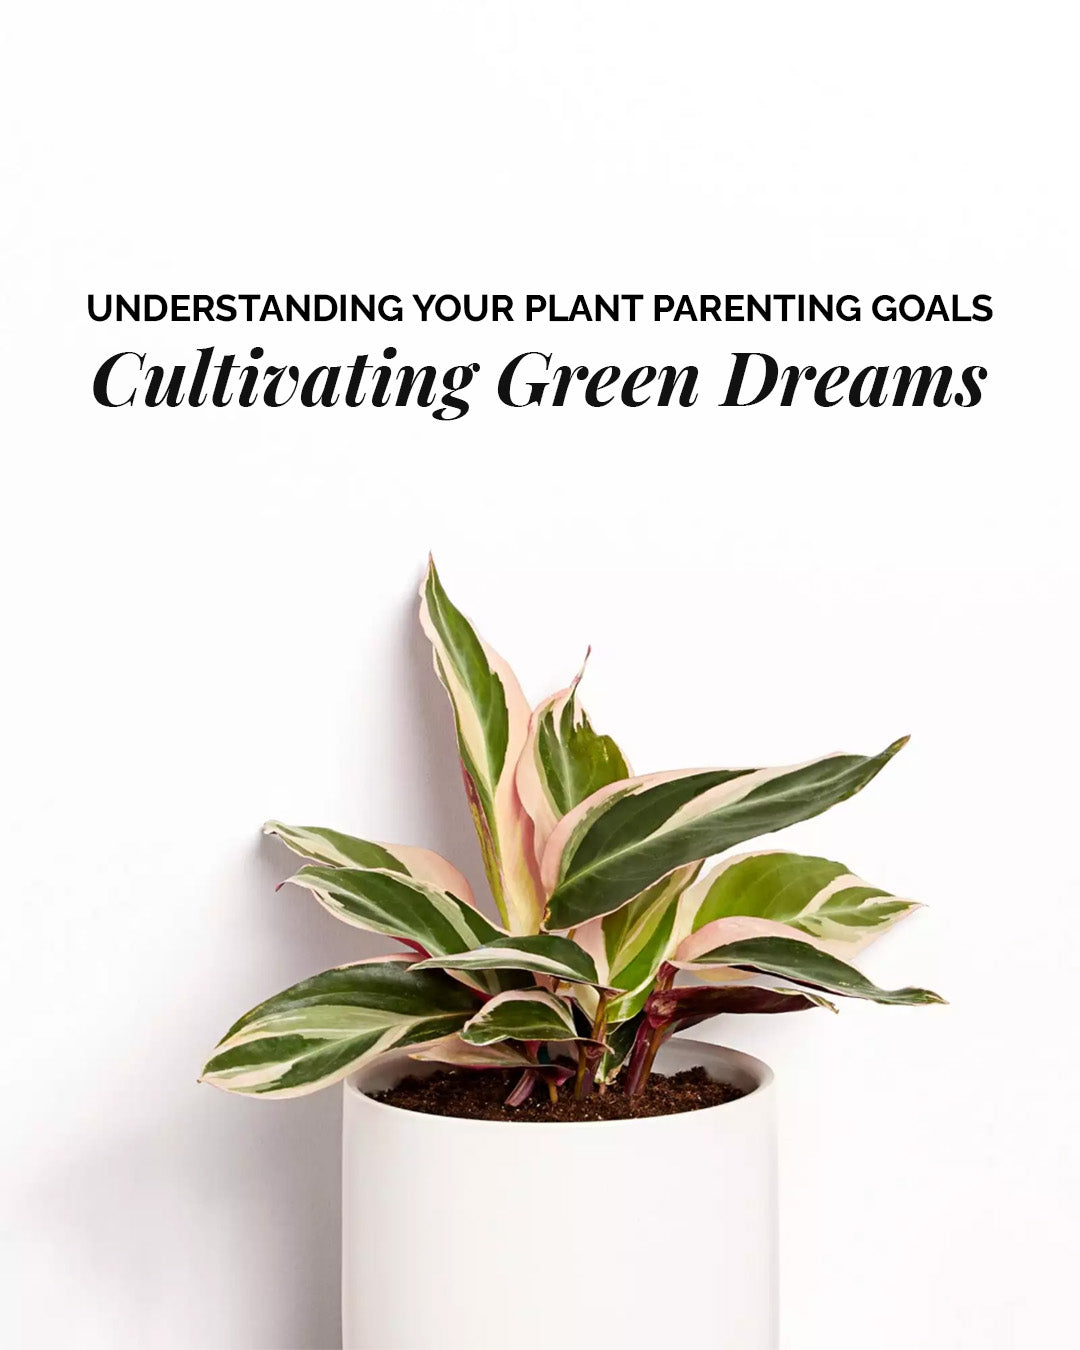 Understanding Your Plant Parenting Goals - Cultivating Green Dreams